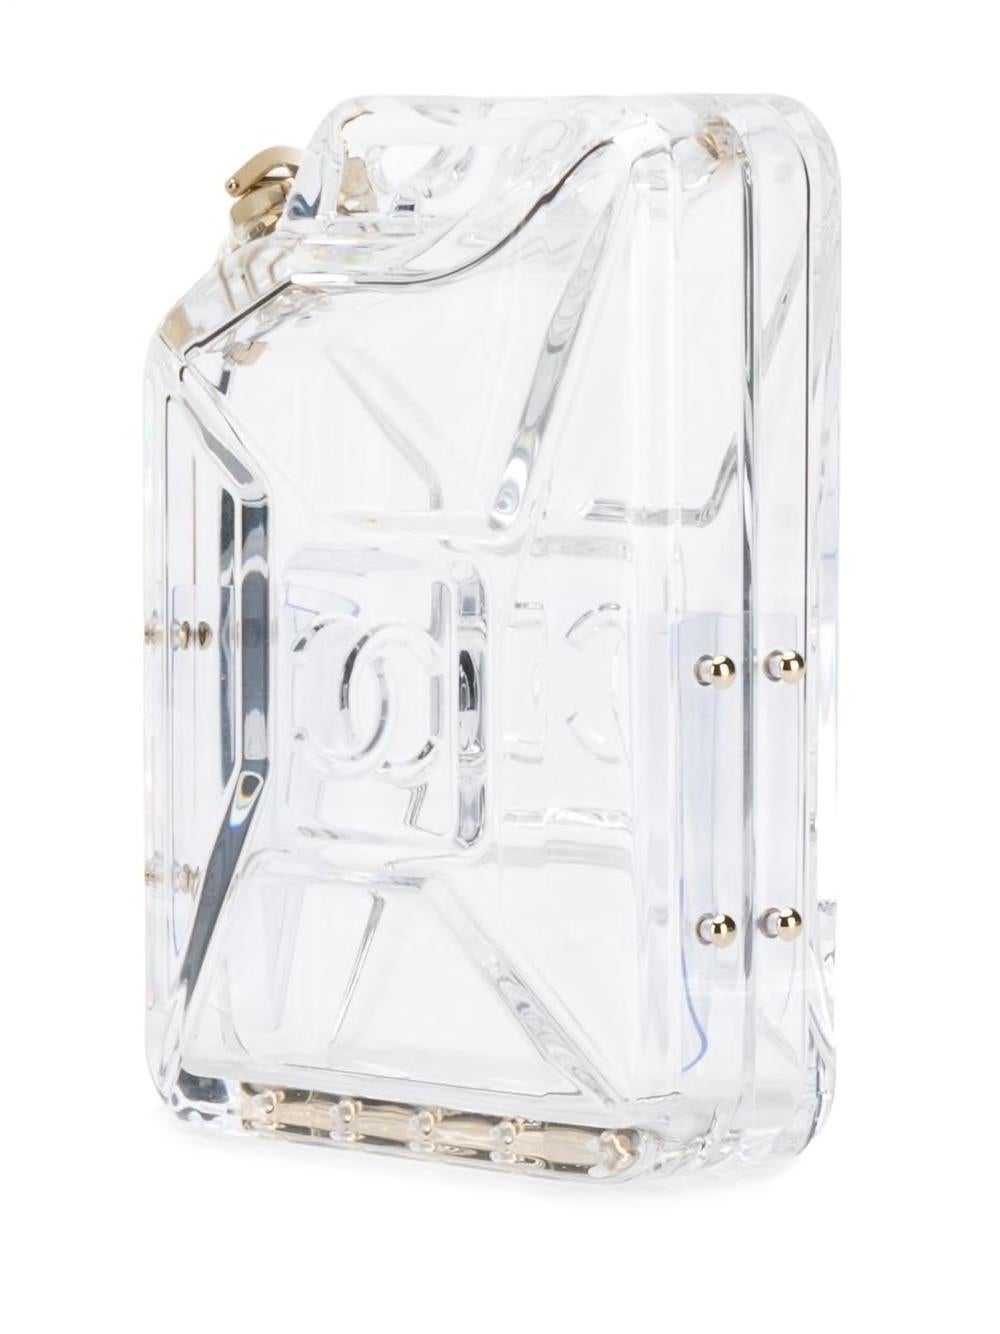 A piece that immediately sold out after debuting at Chanel's Dubai by Night Cruise 2015 show, this Chanel miniaudière is a spectacular collector's item. The hard-cased clutch in the shape of a gas tank is formed in clear, monogrammed plexiglass and